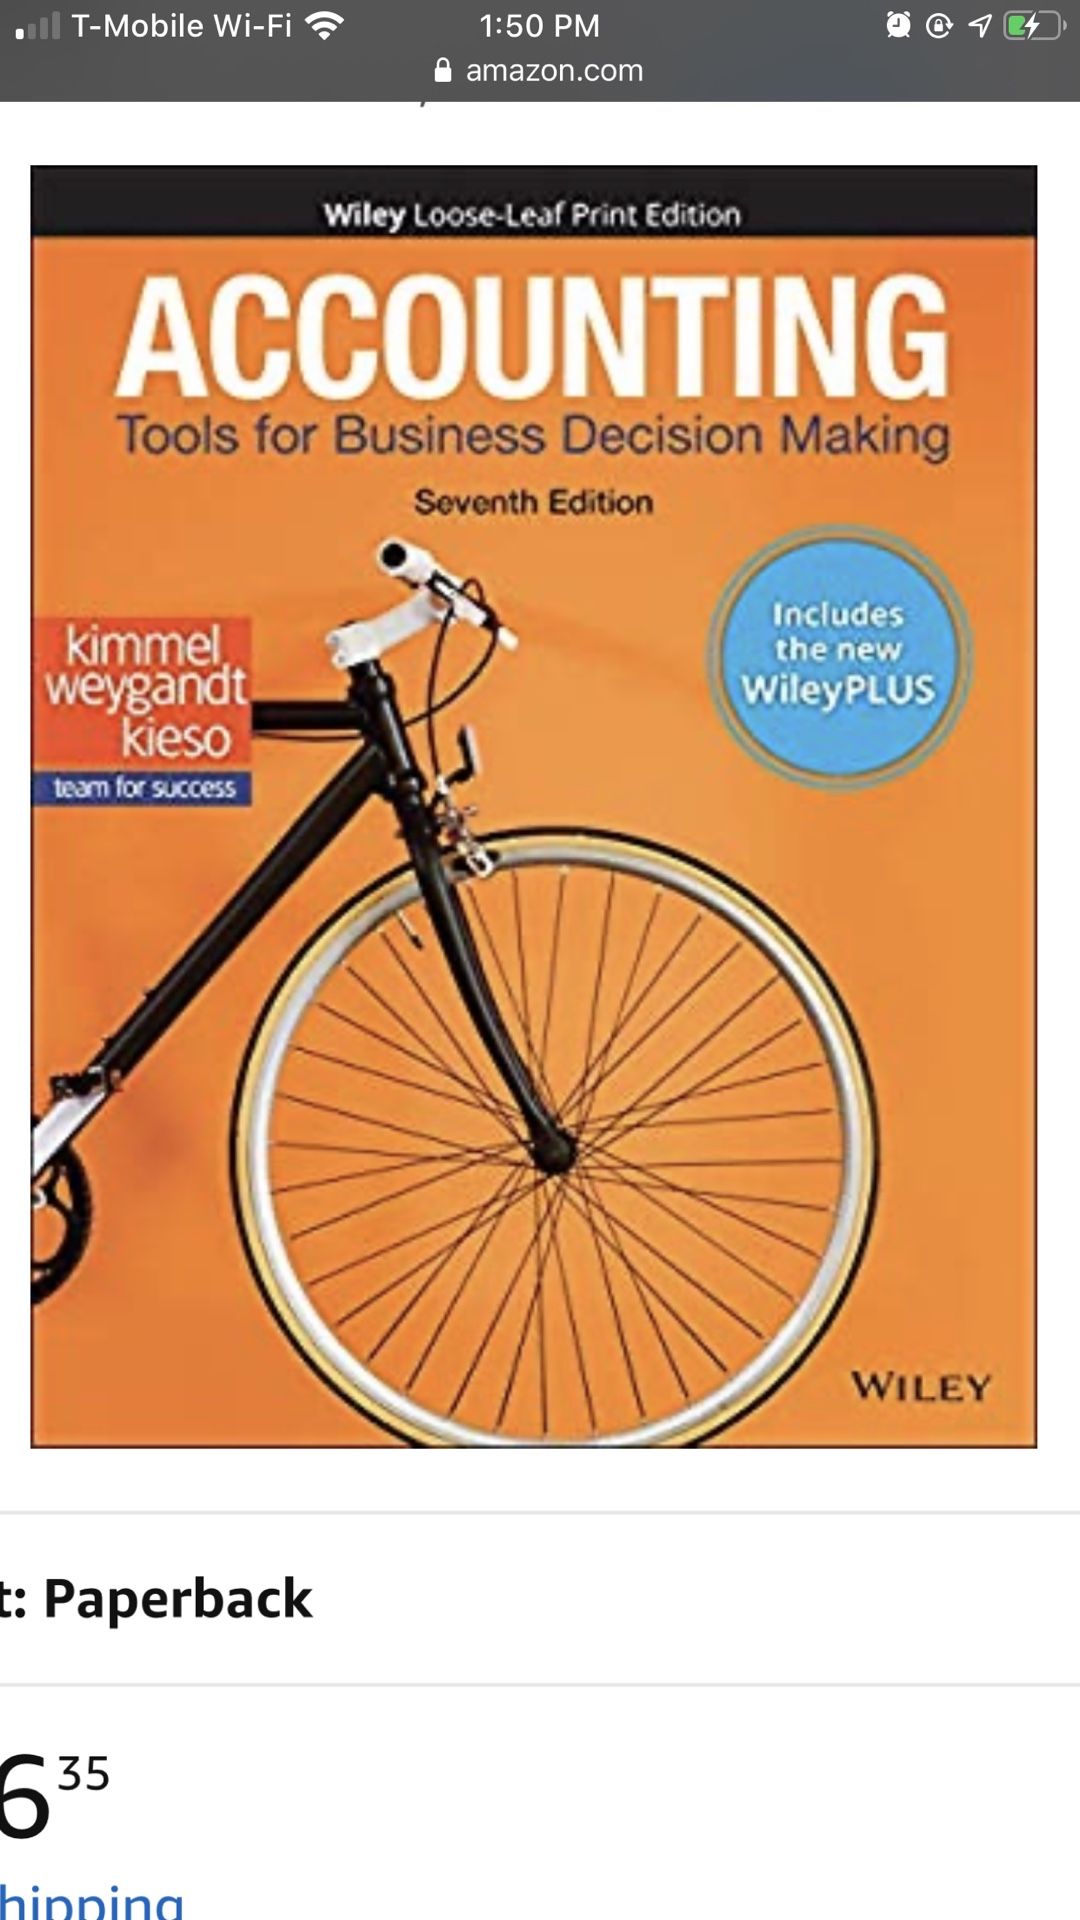 Accounting tools for business decision making